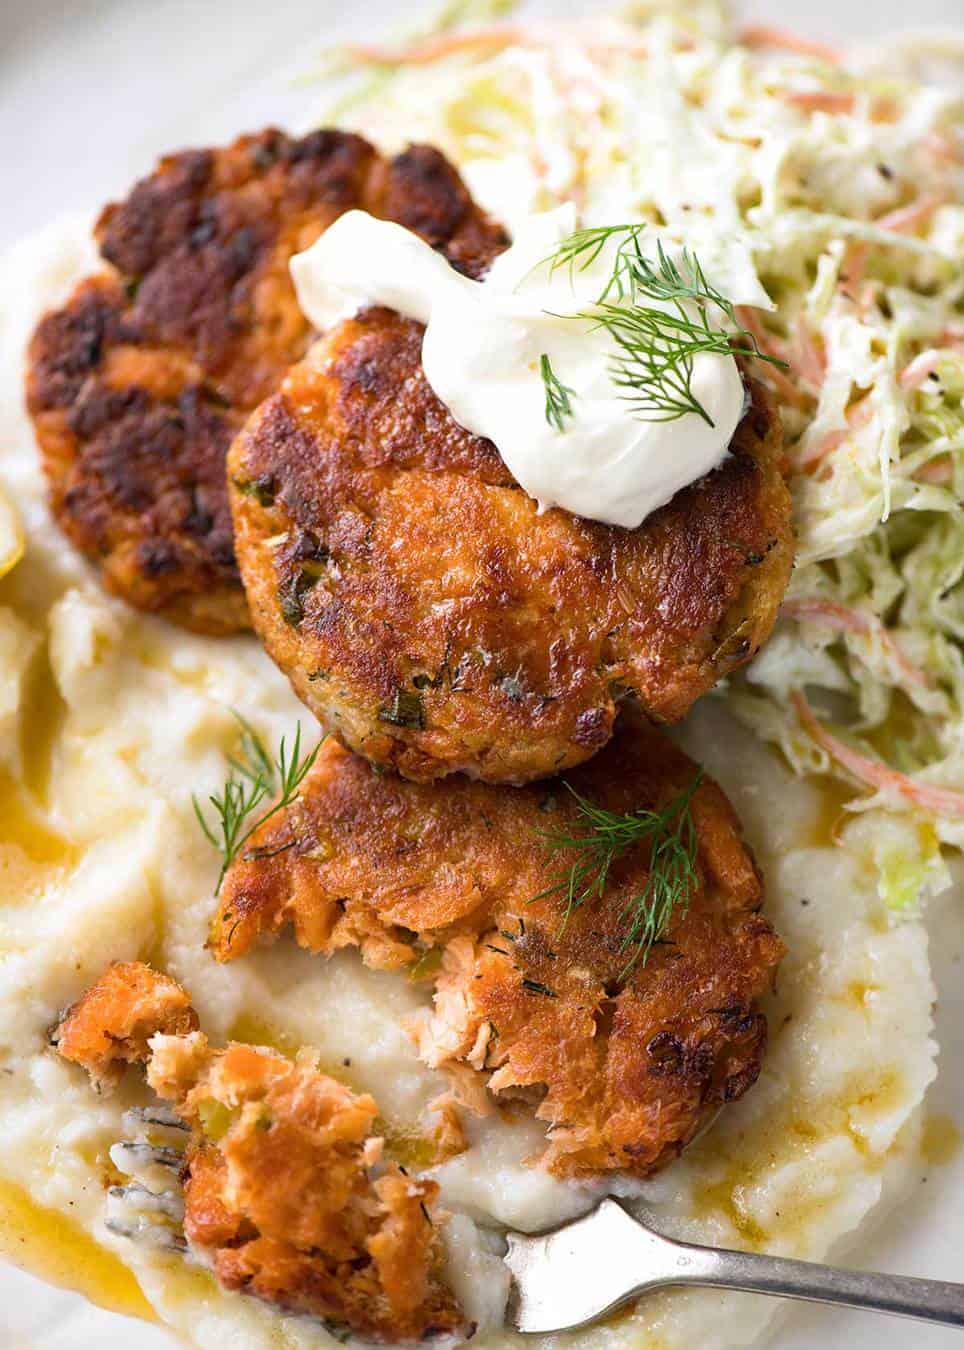 Tender insides studded with flakes of salmon, golden on the outside, these Salmon Patties are baked, not fried. Ultimate transformation of canned salmon - or use fresh! recipetineats.com